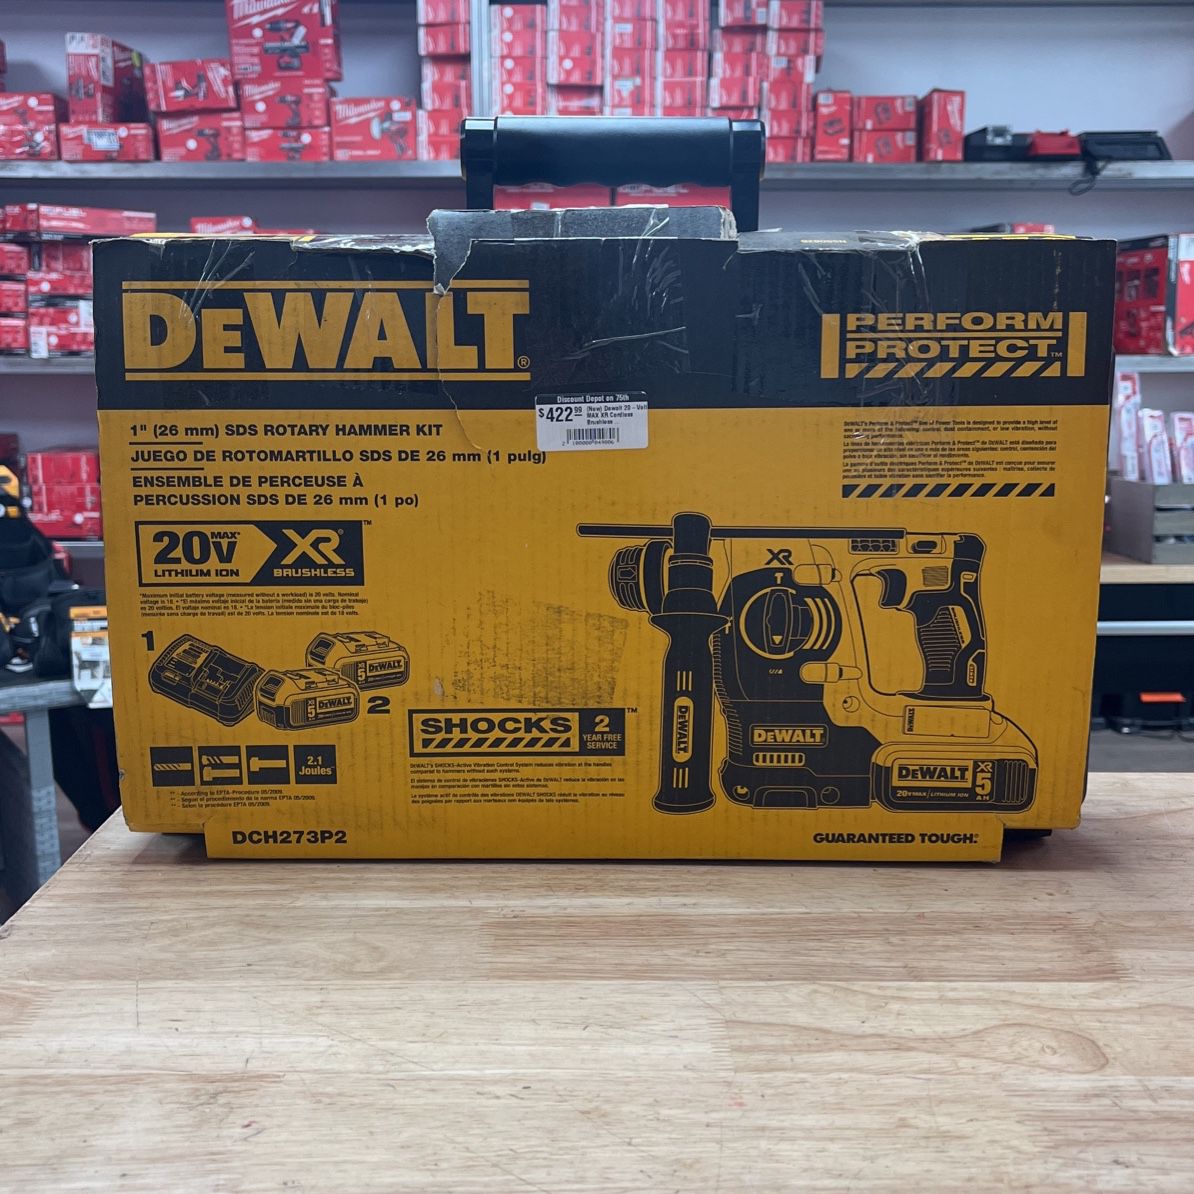 DEWALT 20V MAX XR Cordless Brushless 1 in. SDS Plus L-Shape Rotary Hammer with (2) 20V 5.0Ah Batteries and Charger